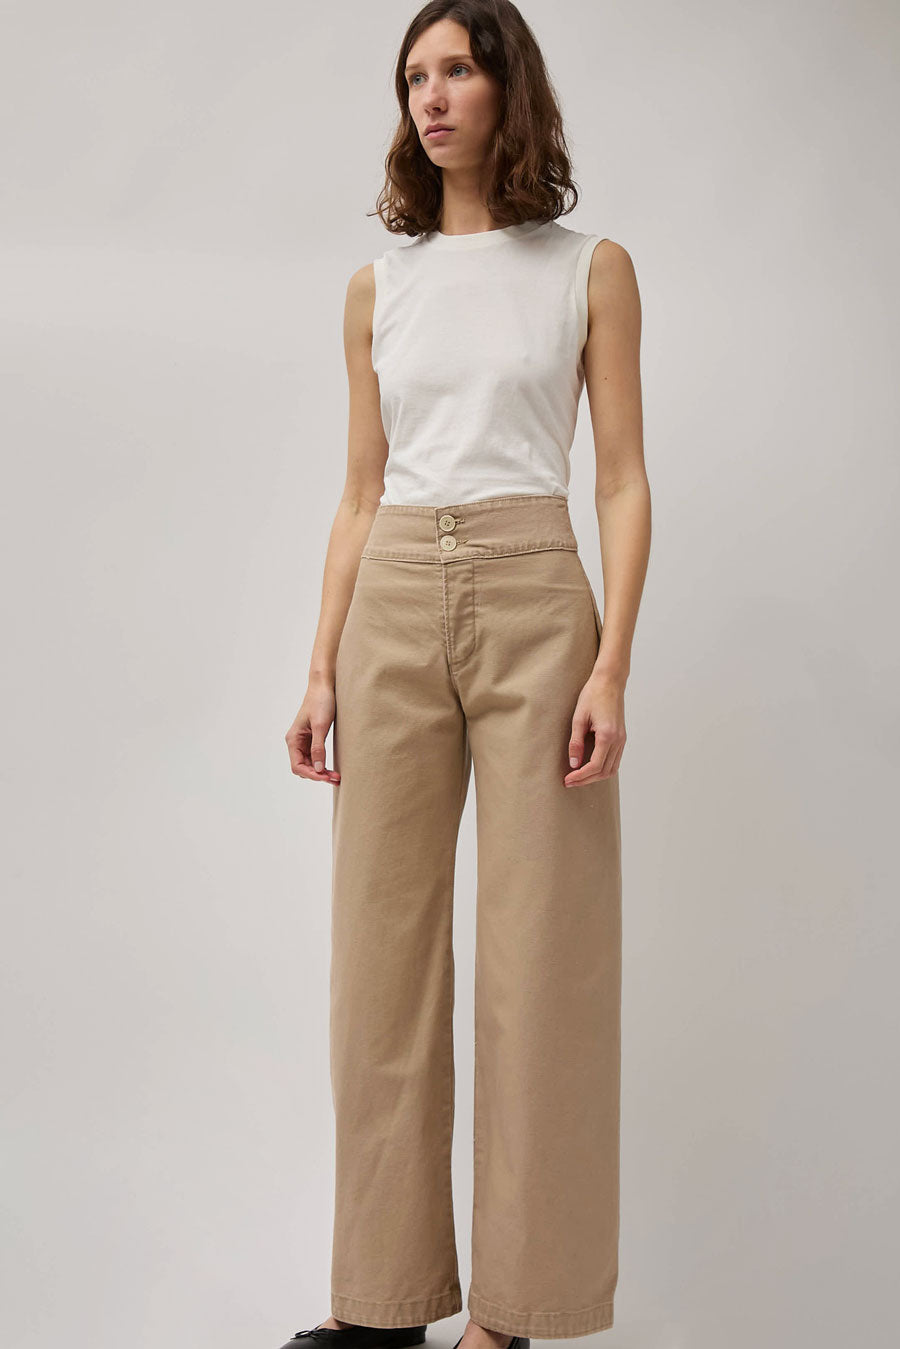 Emma Rothkopf Picnic Pant in Cement